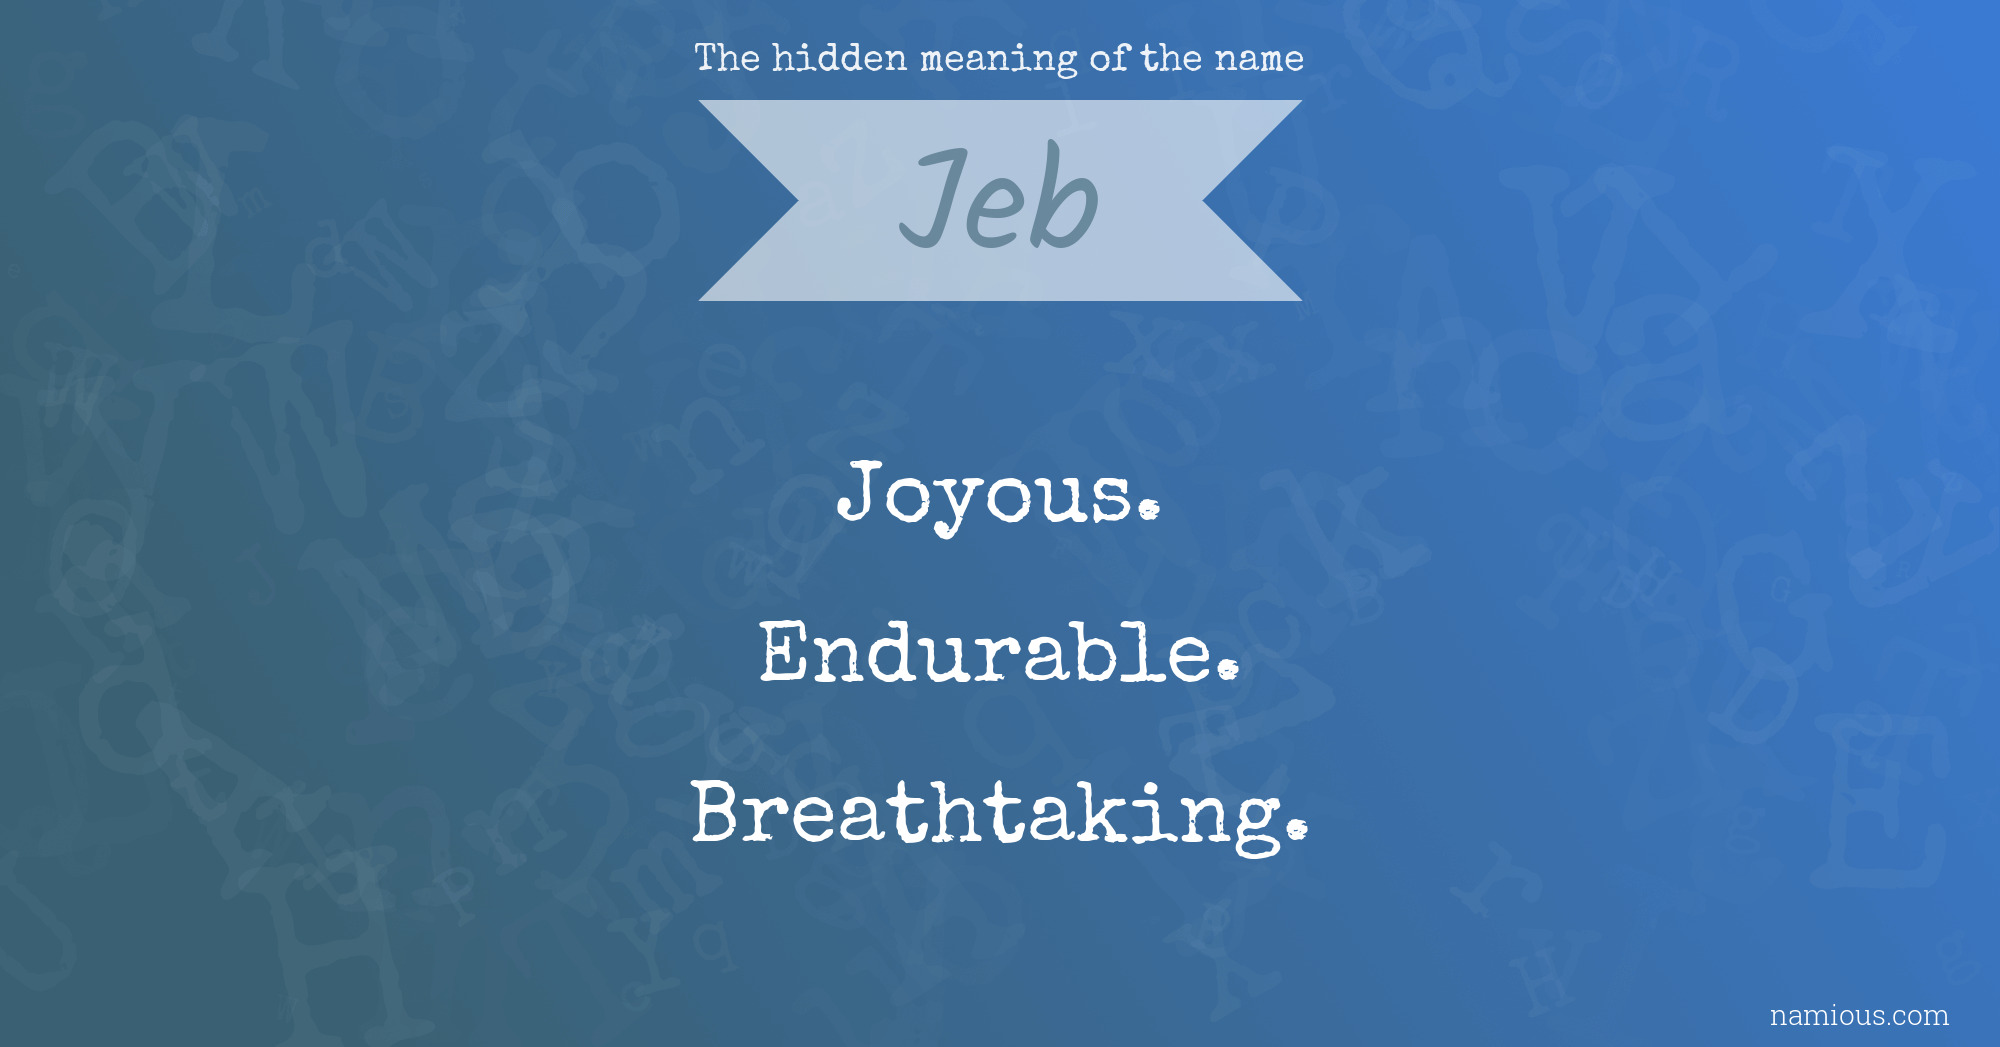 The hidden meaning of the name Jeb